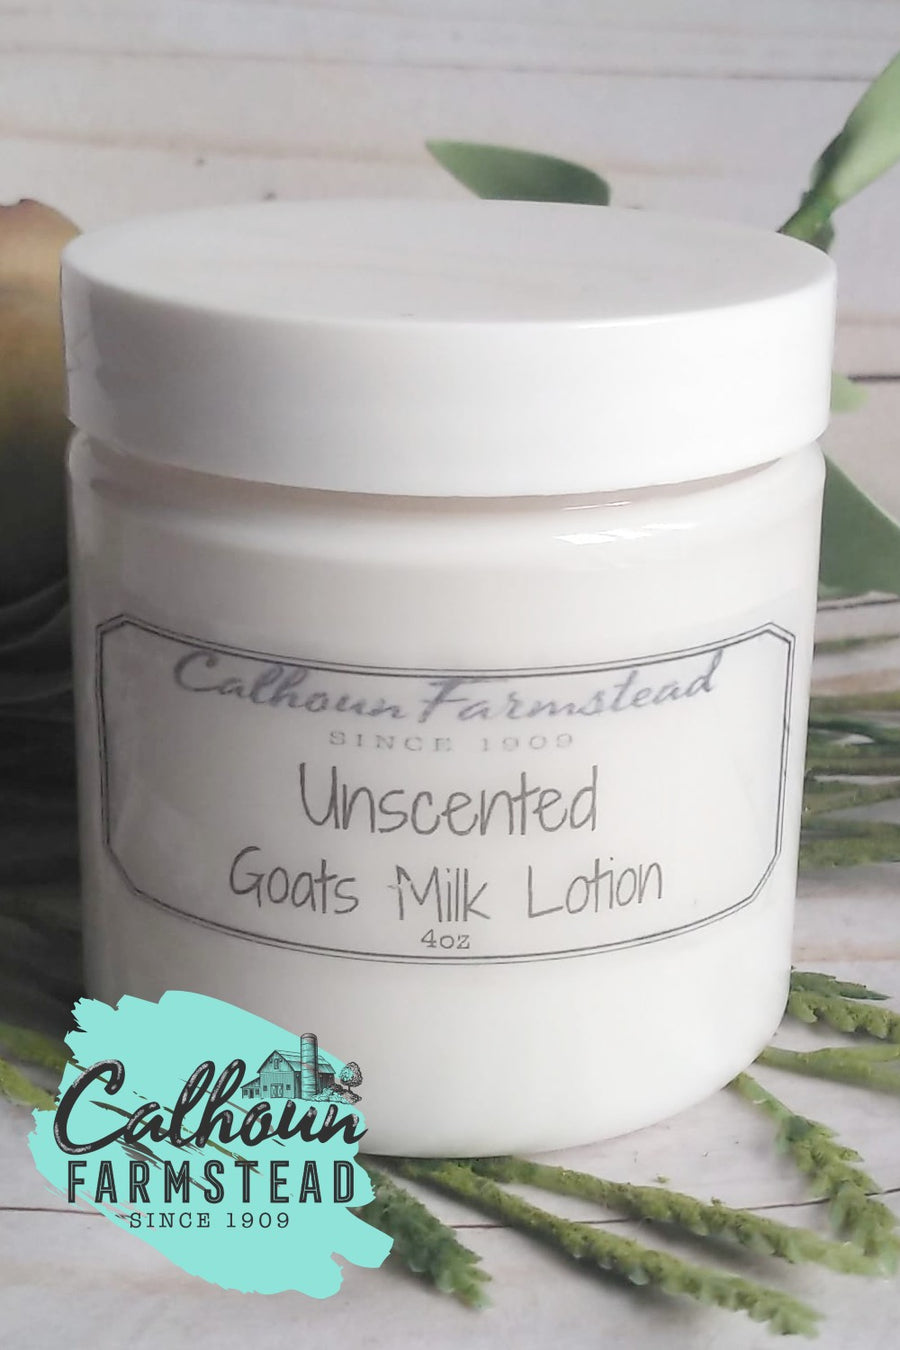 unscented goats milk soap for sensitive skin types. Unscented is great lotions for babies and kids. Good for allergies.